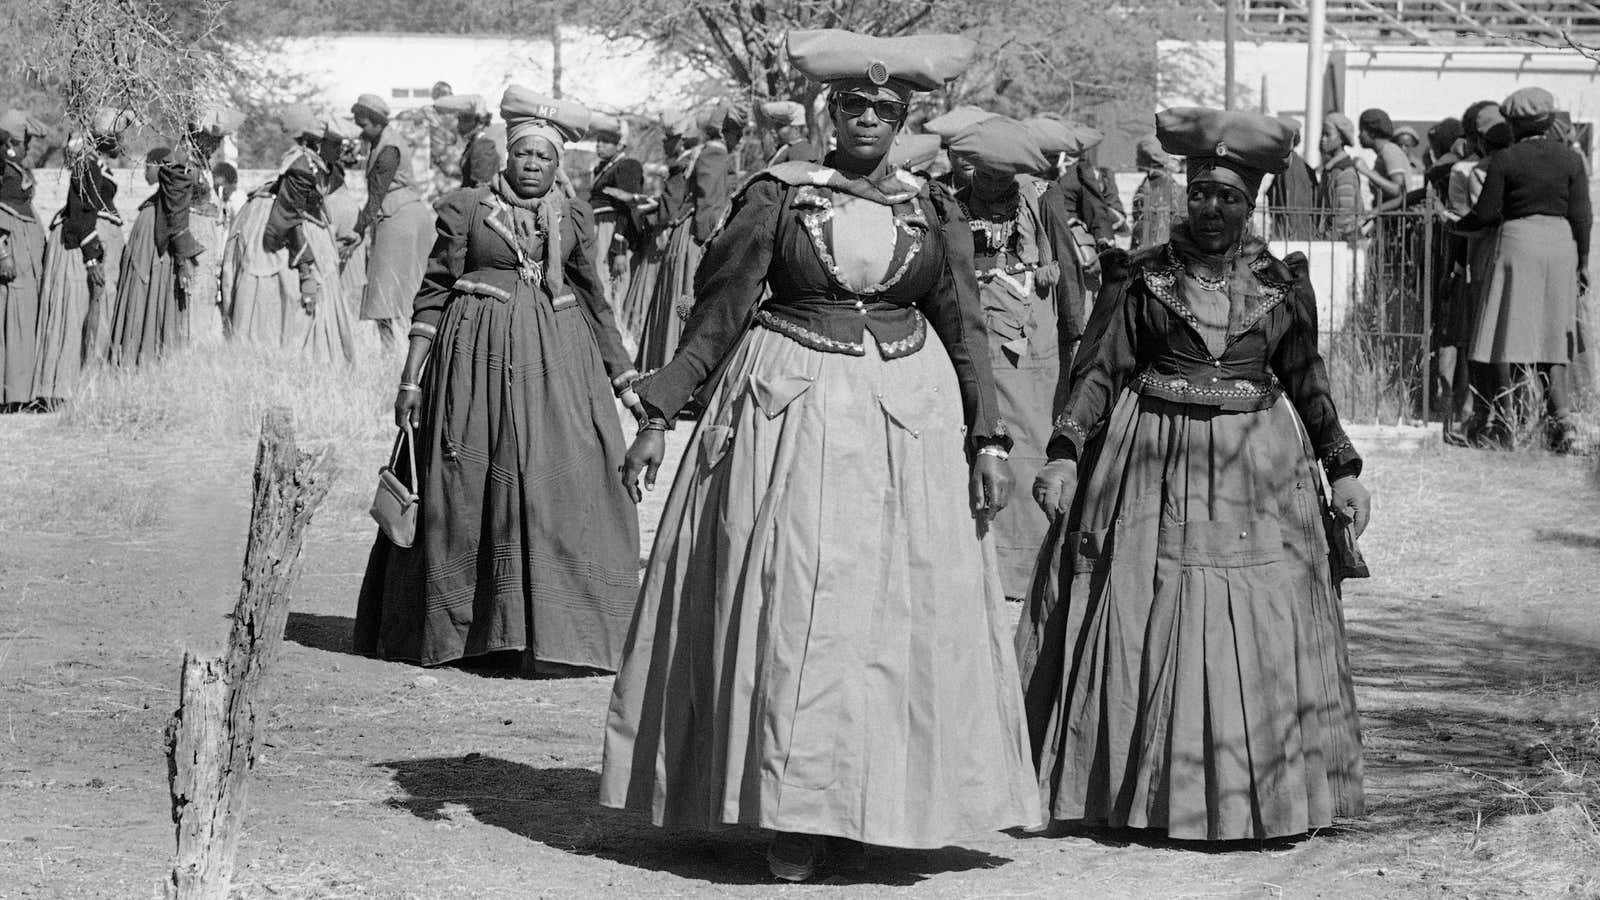 Women of the Herero people show their traditional dress in Windhoek.